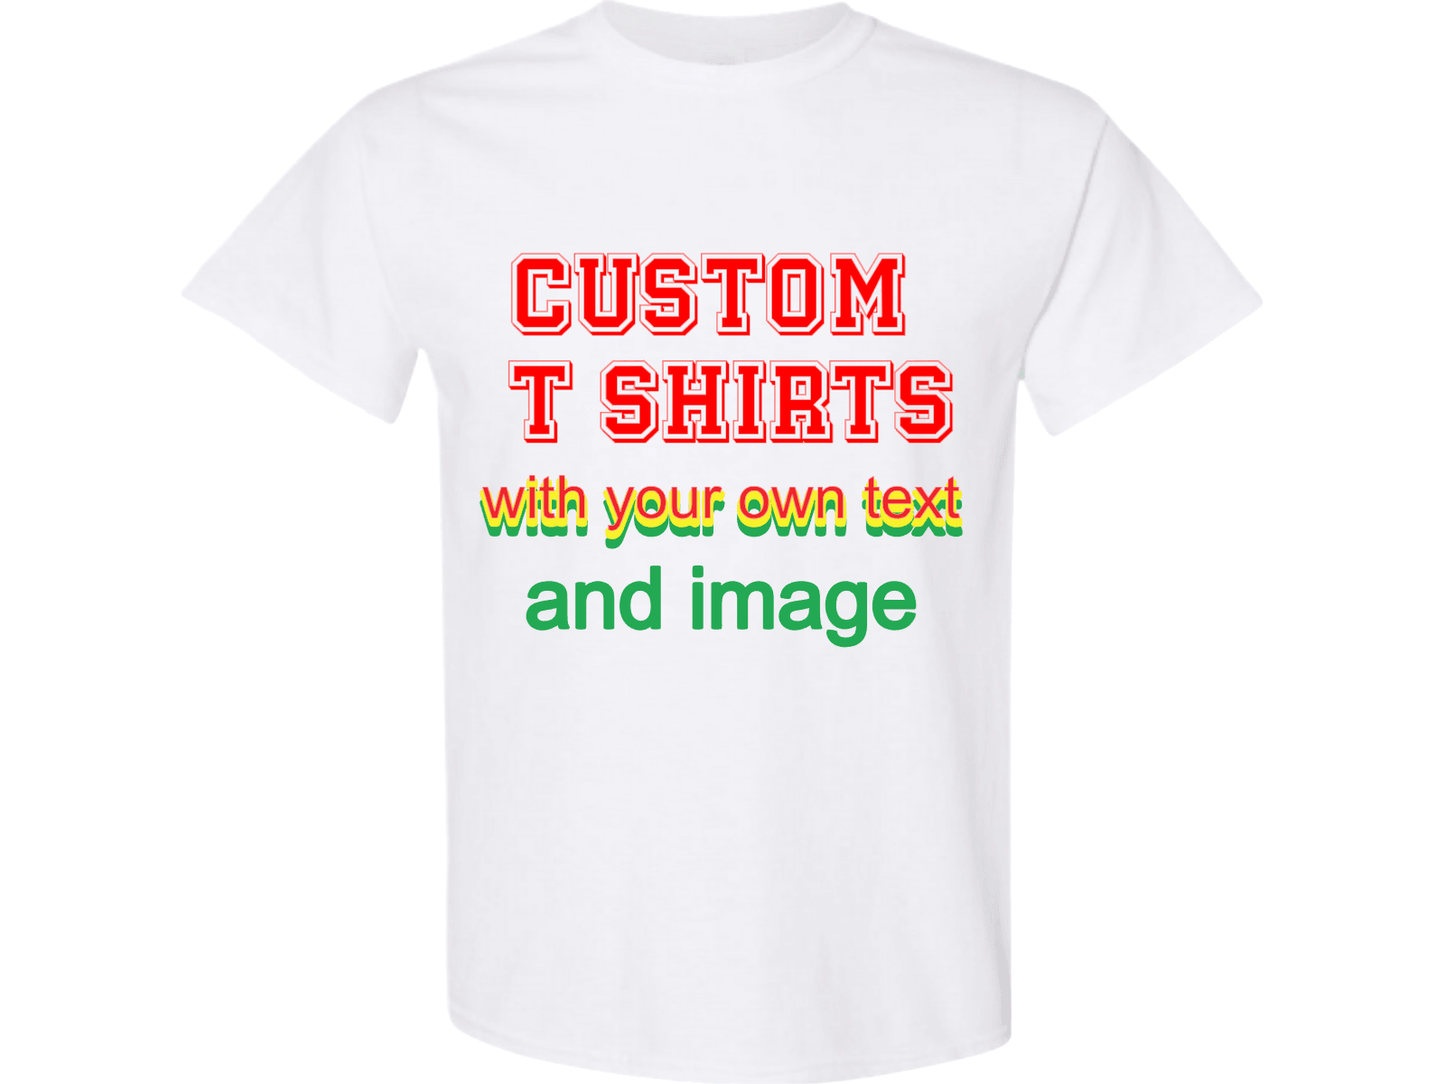 Personalize Shirts, Text and Image, Customized Shirts, Custom T-shirts , Personalized T-shirts , Unisex Tee